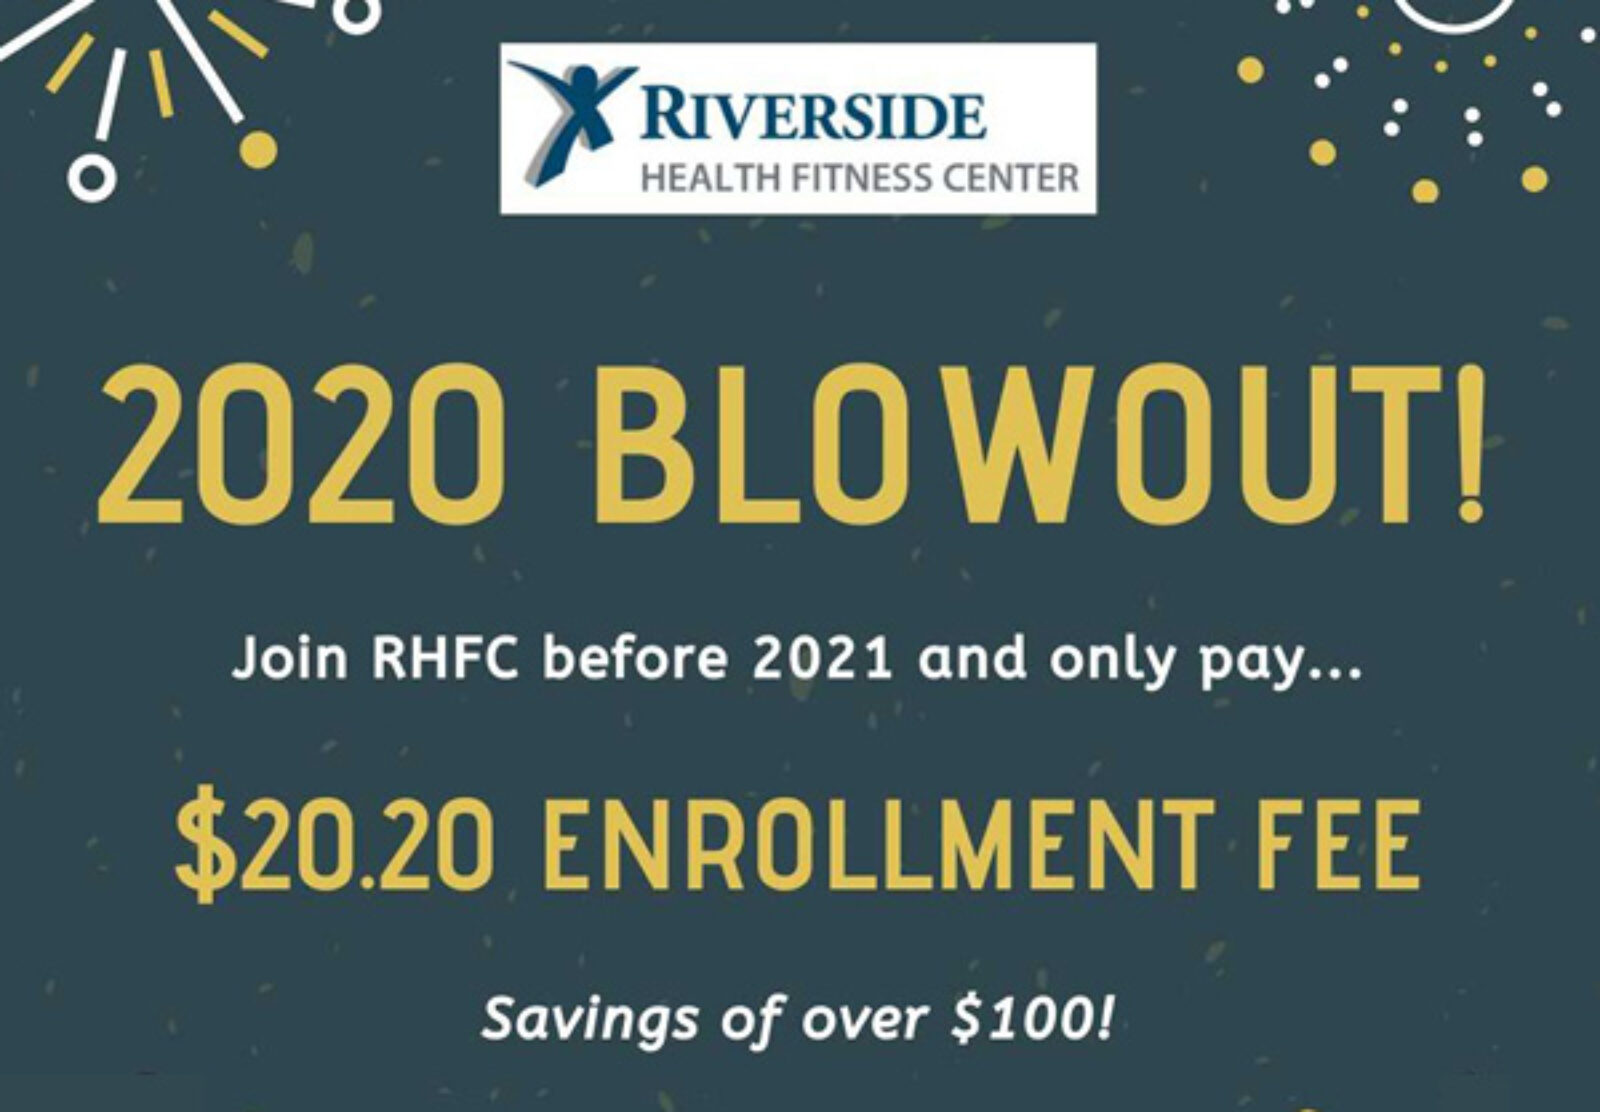 Riverside Health Fitness Center 2020 Blowout Special!